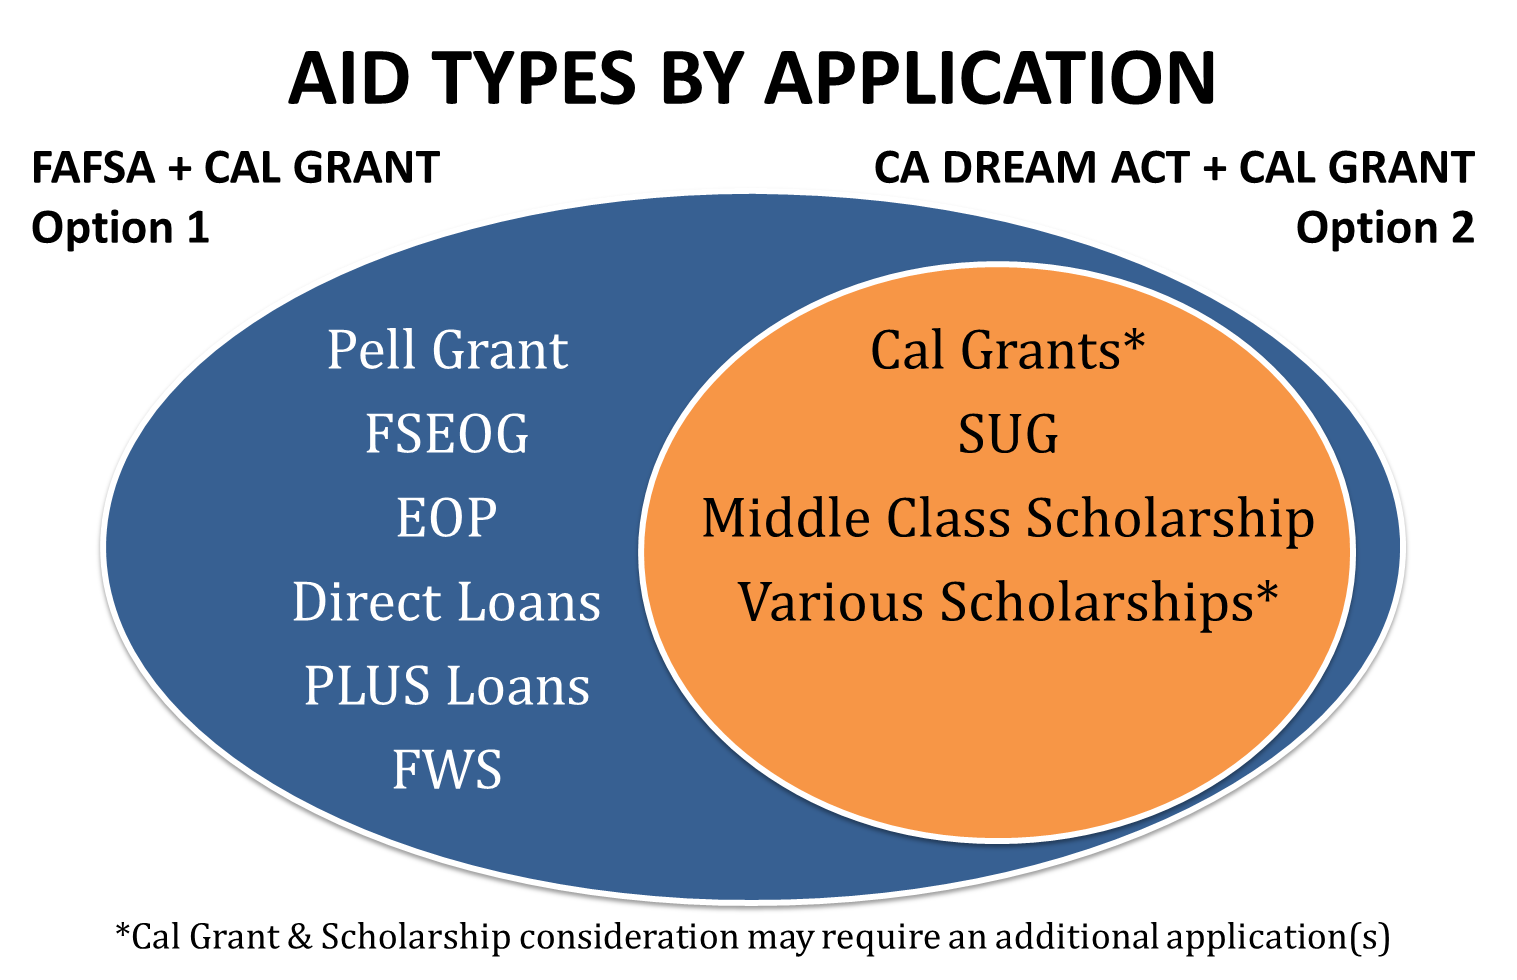 Fin Aid Applications and Associated Aid